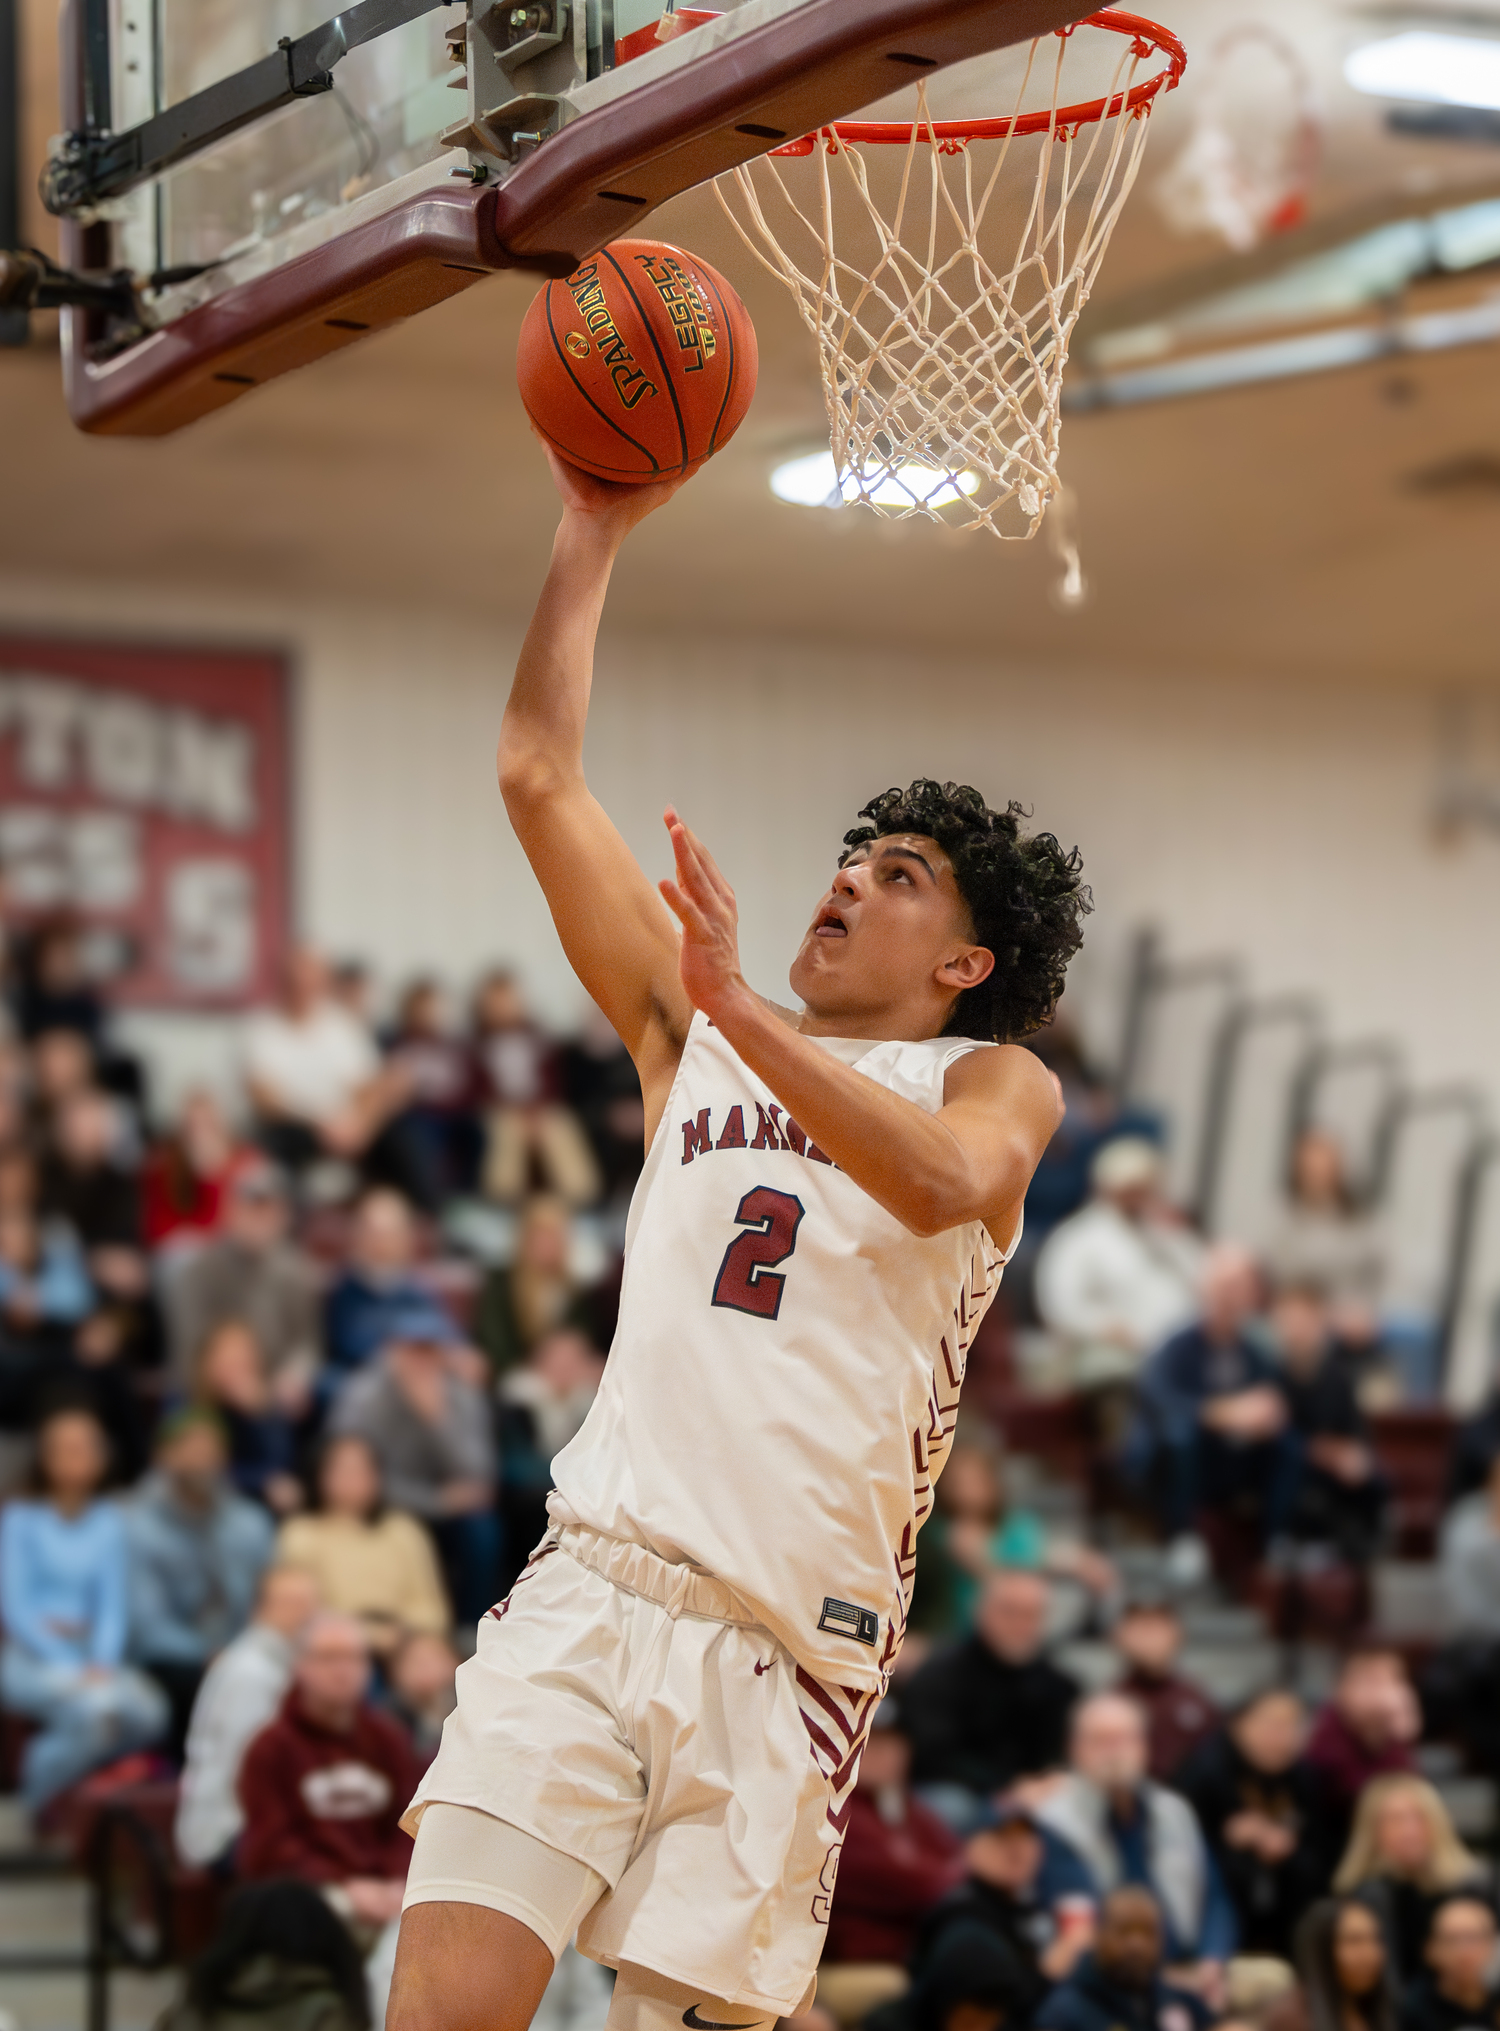 Southampton sophomore Alex Franklin scored 11 points, had 10 rebounds and also chipped in with five assists in Saturday's victory over Kings Park.   RON ESPOSITO/SOUTHAMPTON SCHOOL DISTRICT